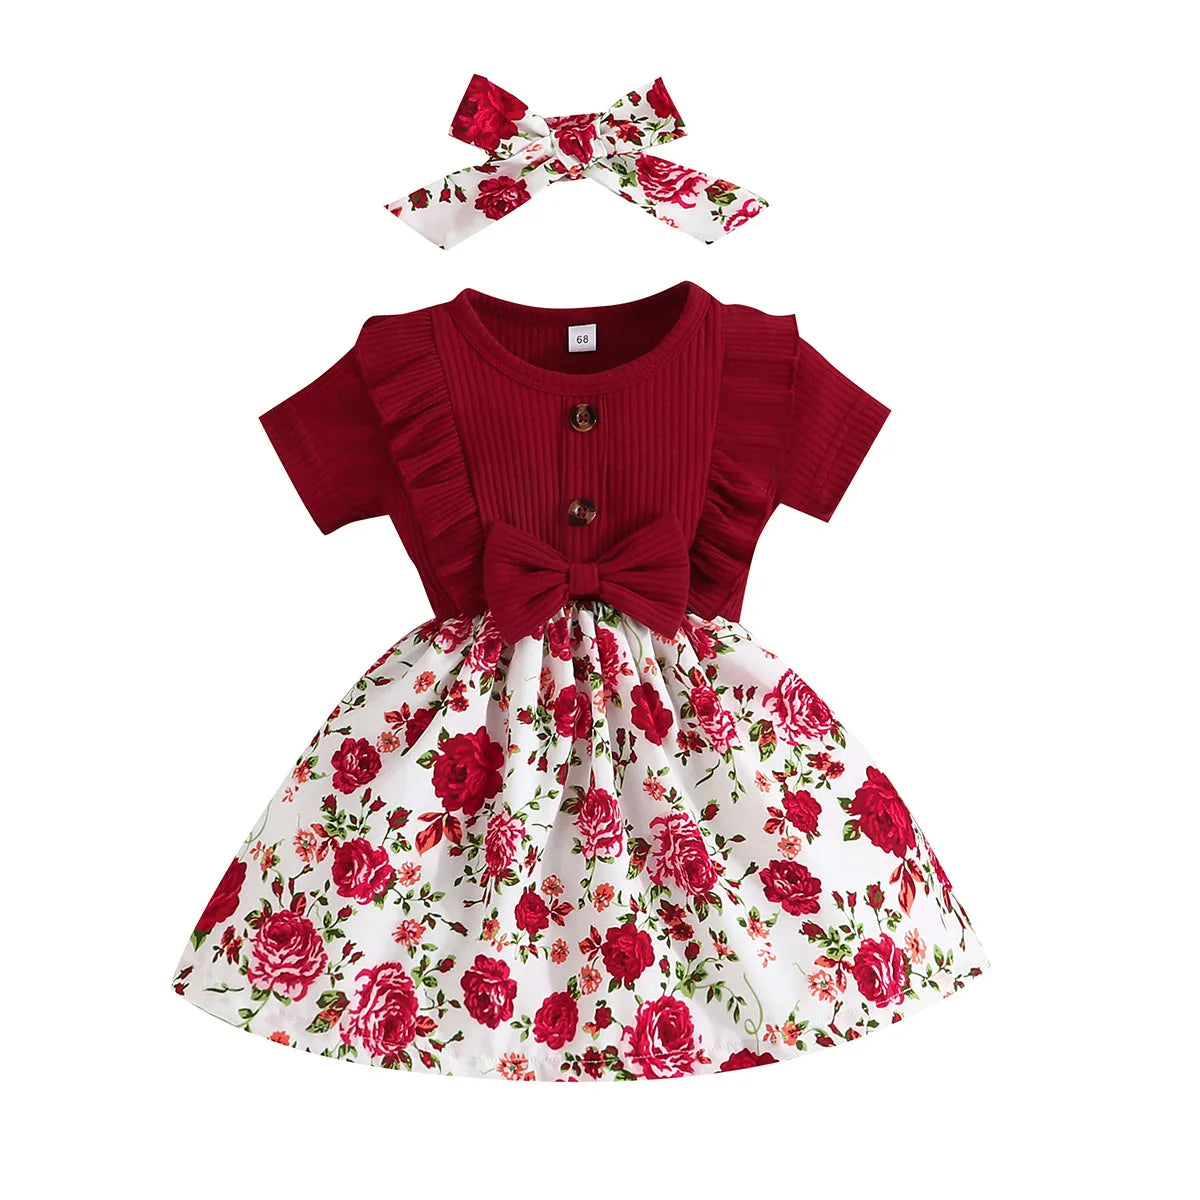 Dress Baby Girl 0-3 Years old Summer Short Sleeve Fashion Cute Floral Kids Princess Dresses For Newborn Baby Girls